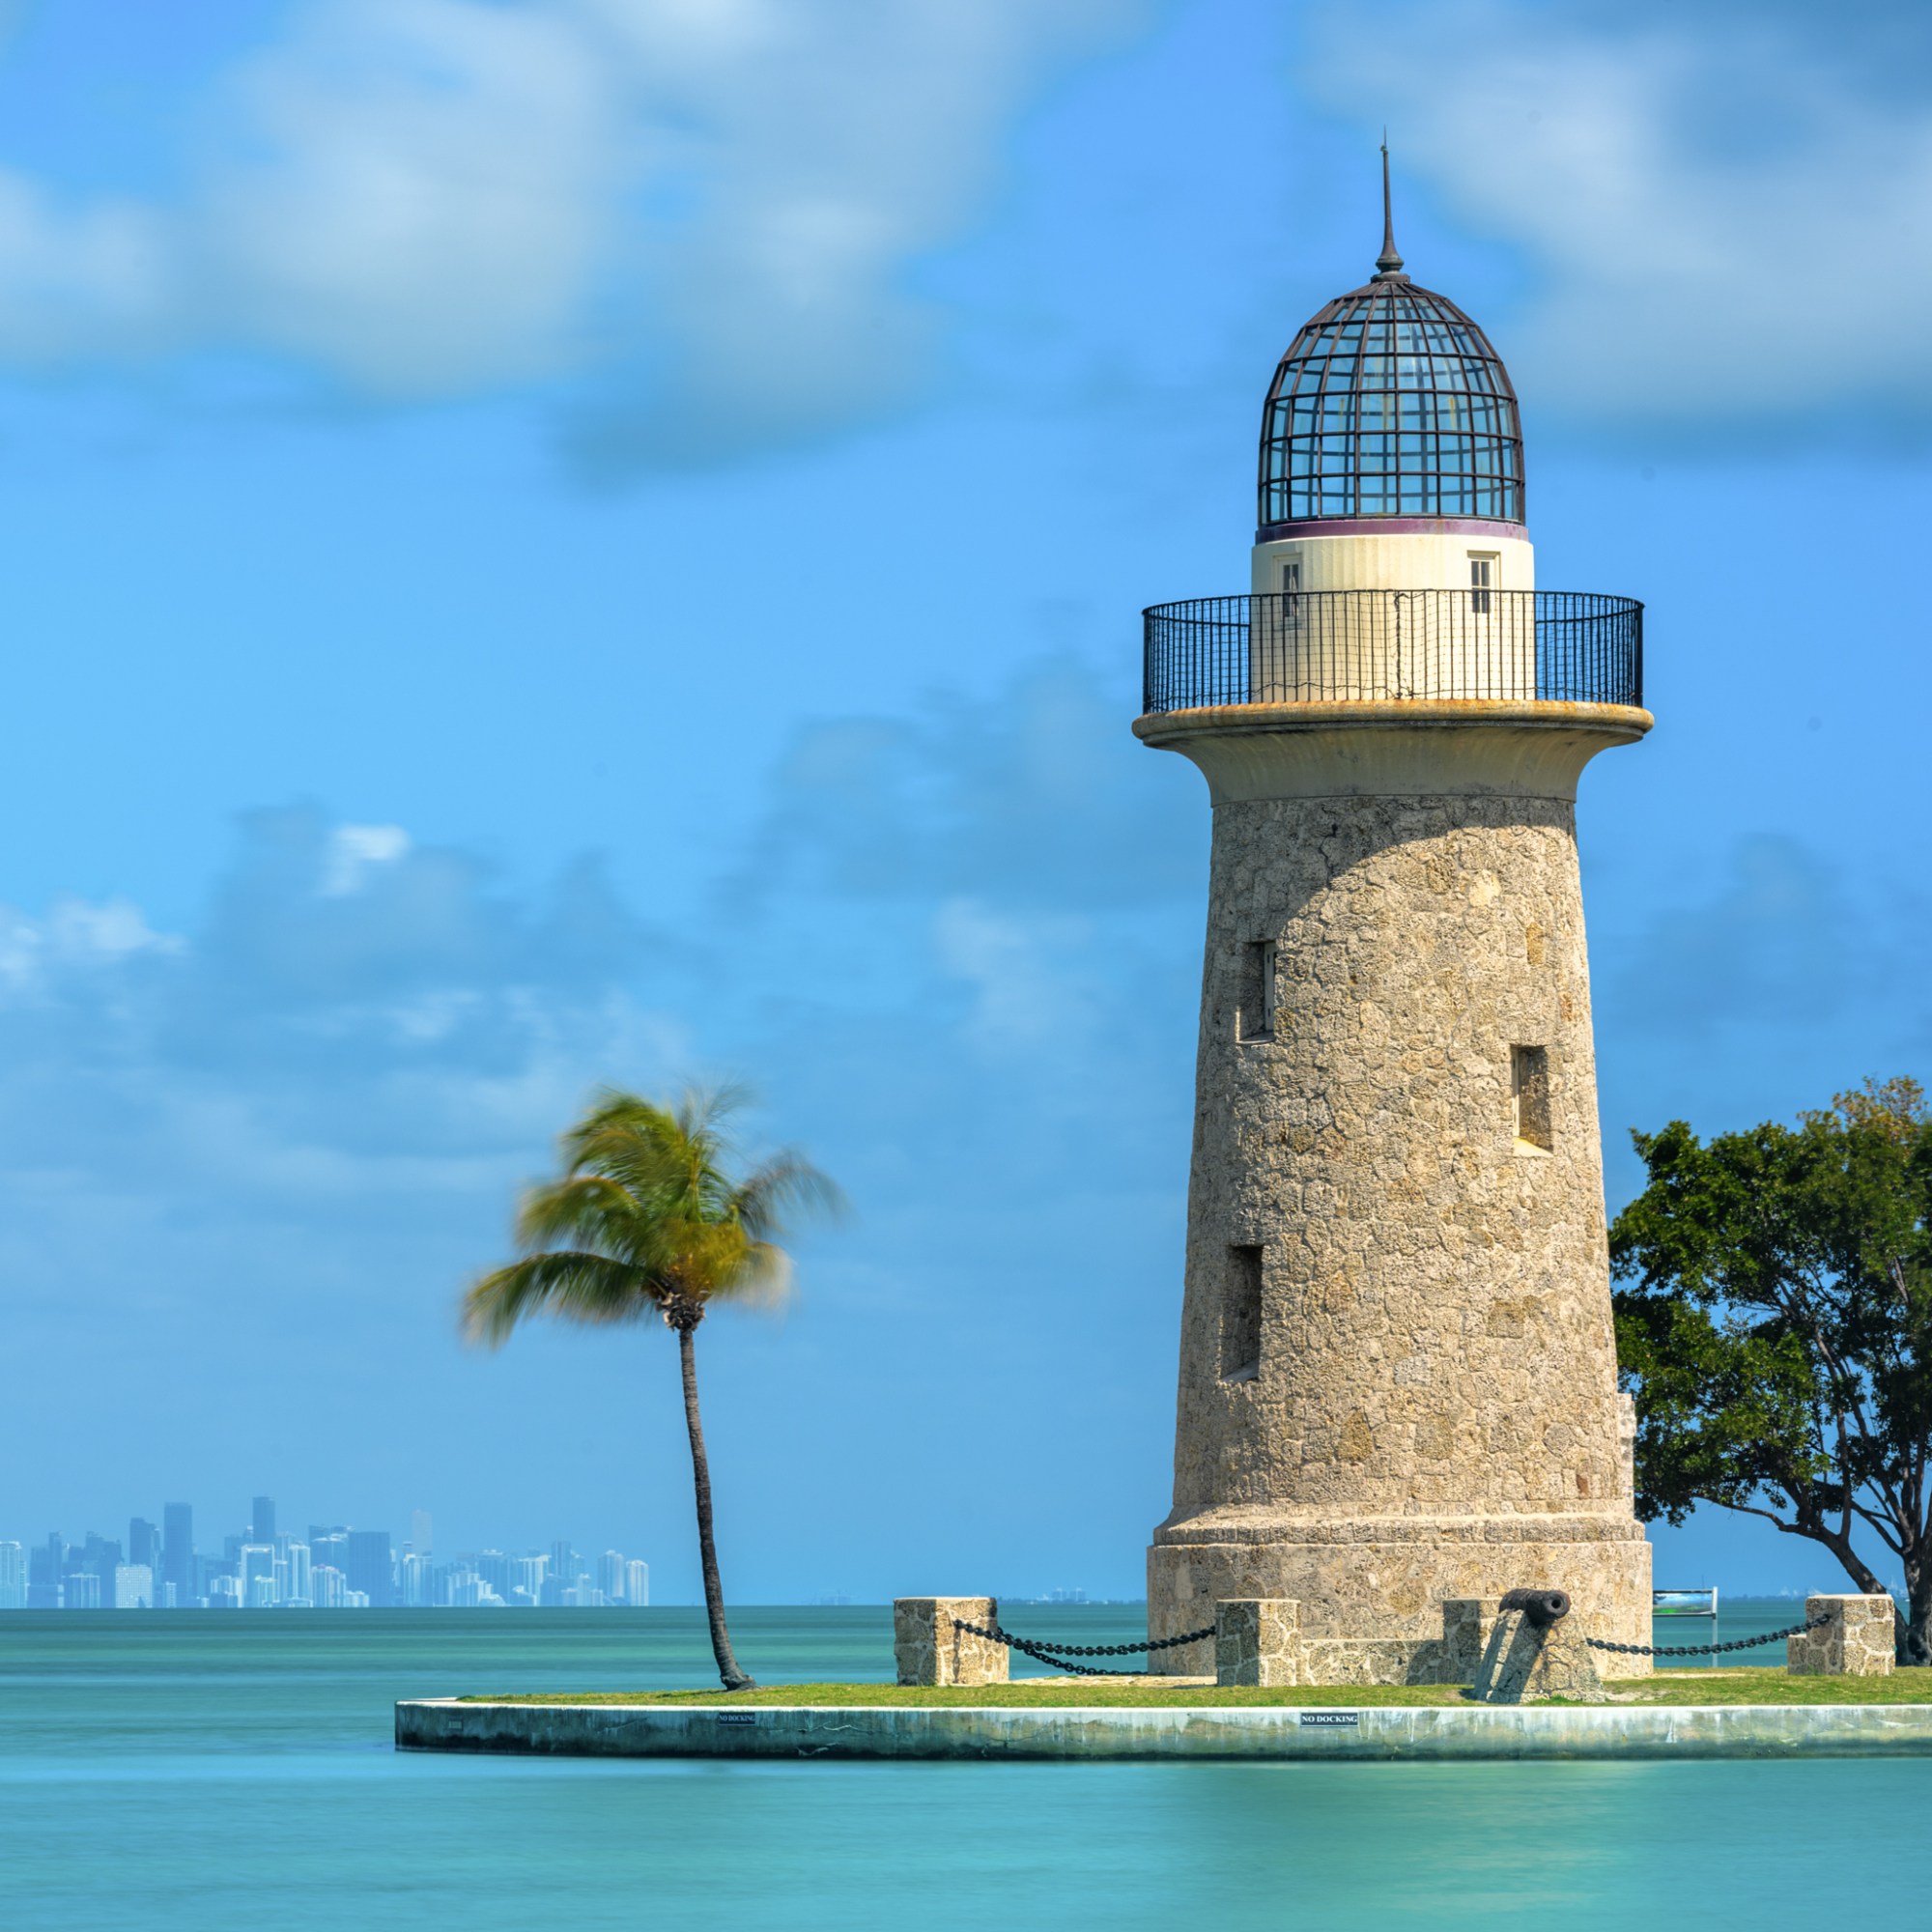 The Boca Chita Lighthouse in Florida's Biscayne National Park.